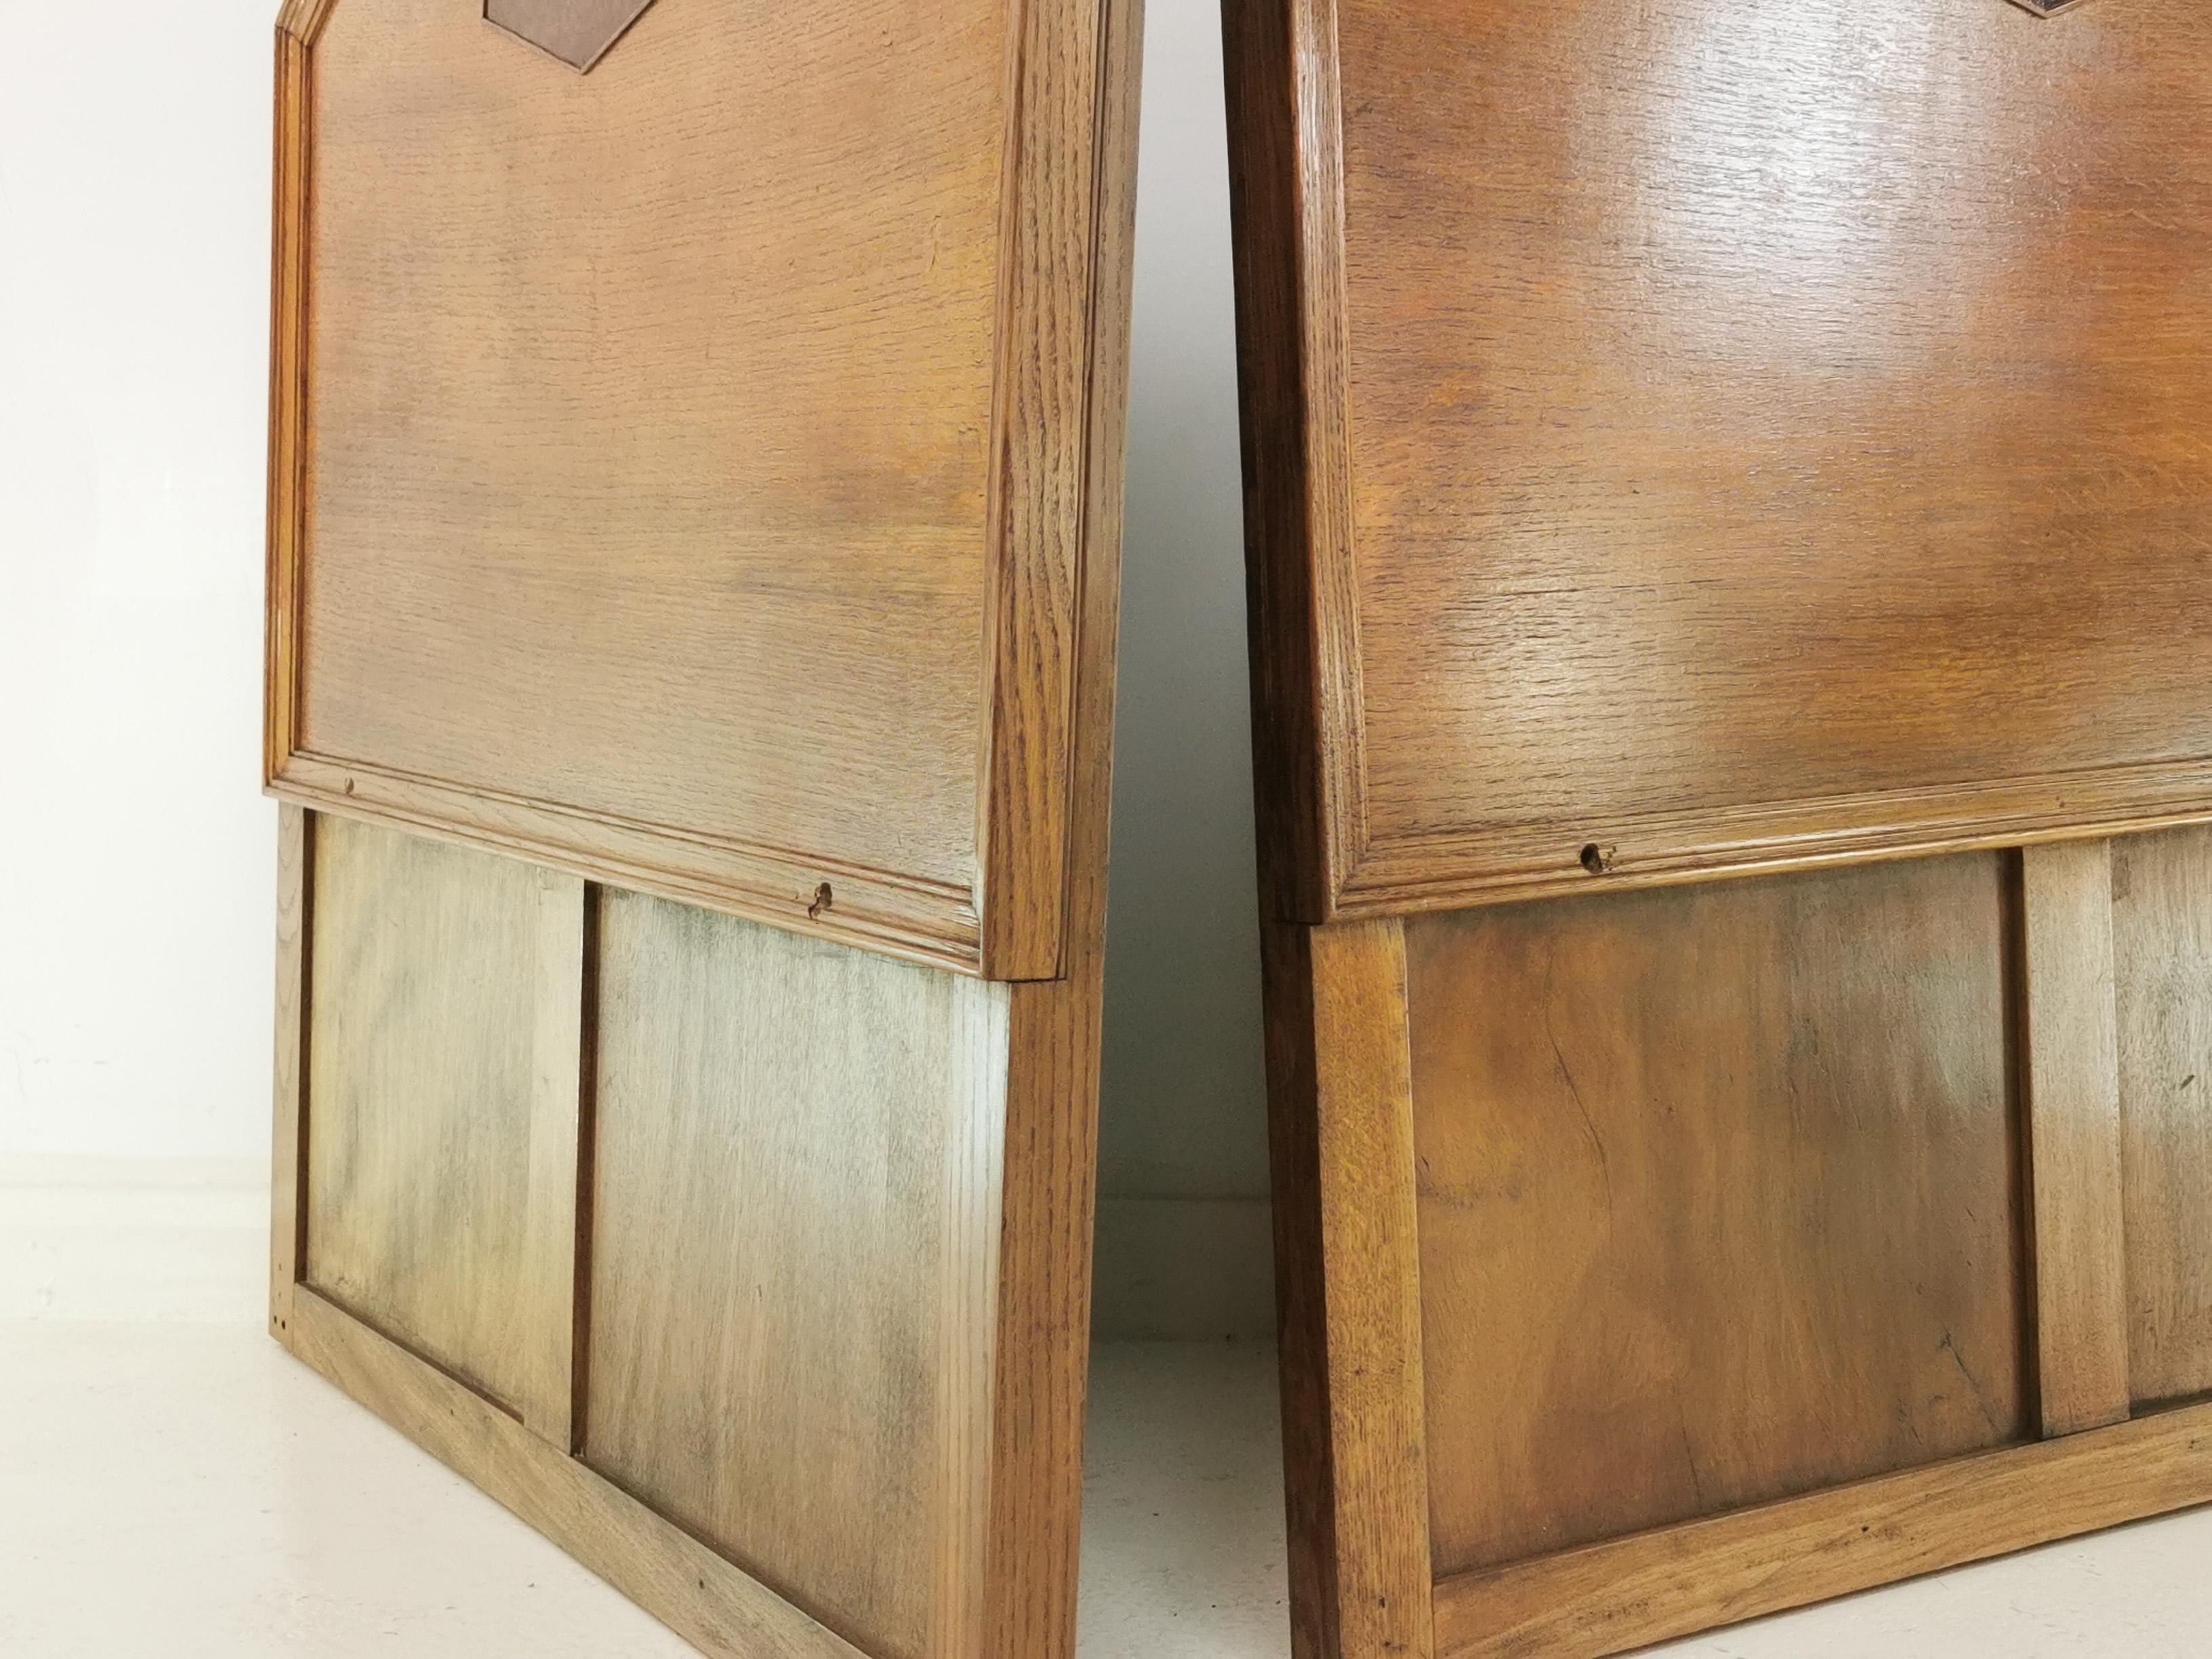 Maple & Co Headboards

A pair of British made Maple & Co headboards. 

From the first quarter of the 20th century, this quality oak piece has a superb natural grain and is offered in excellent condition, well cared for and maintained over